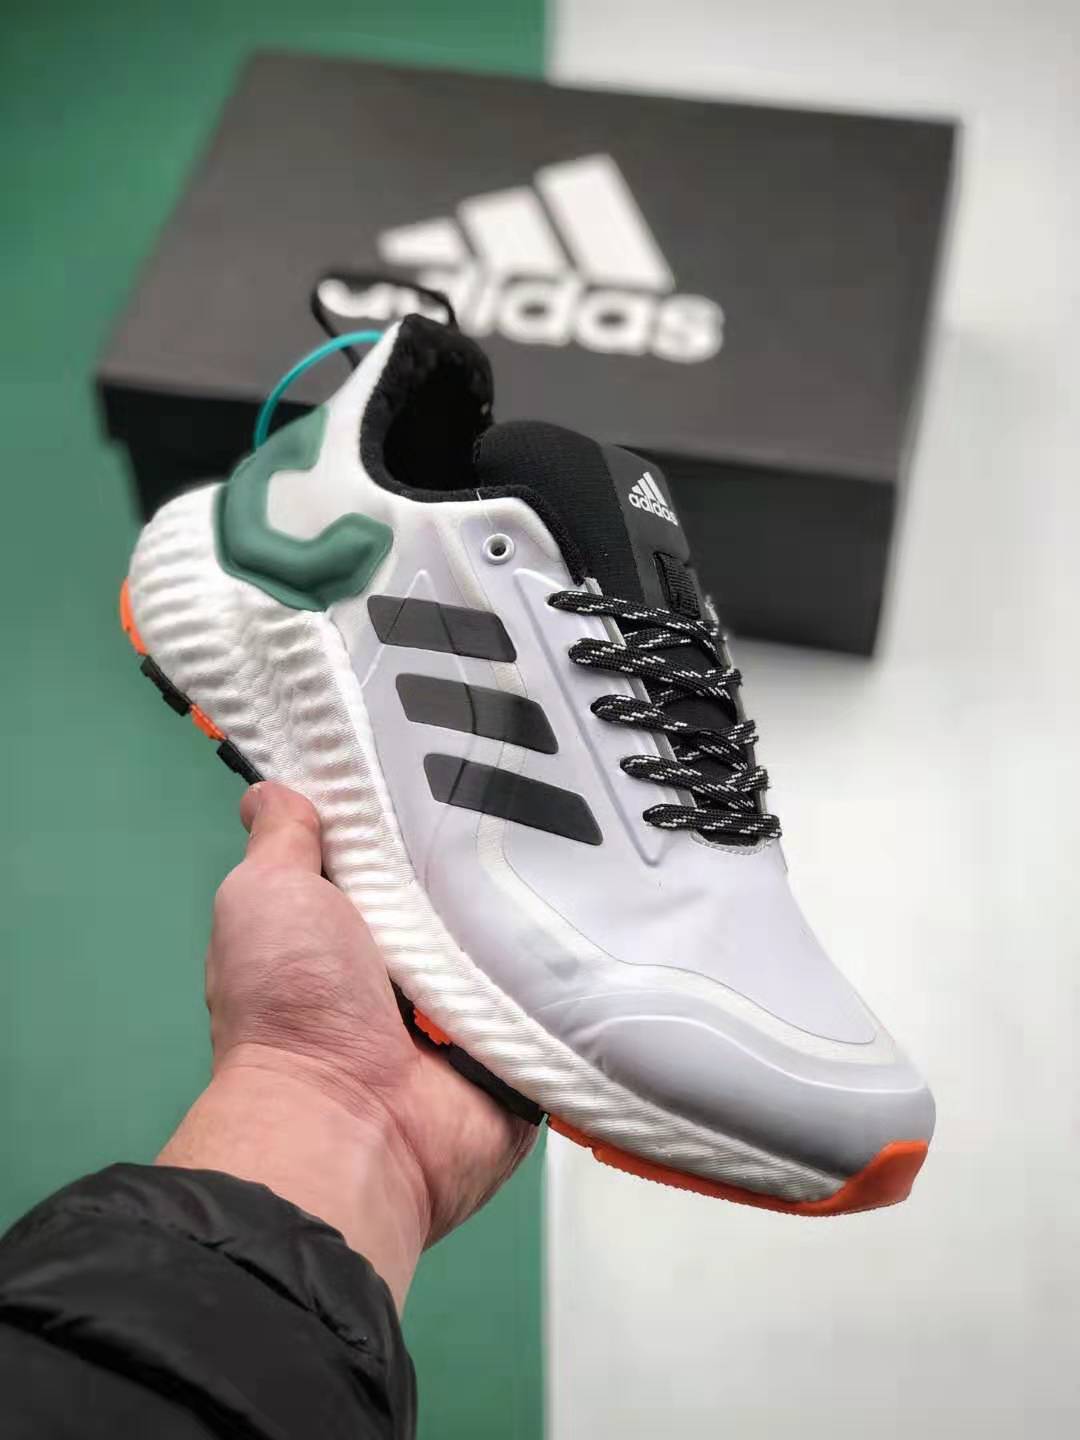 Adidas AlphaBounce Boost White Green Orange EG6085 - Stylish and Supportive Footwear